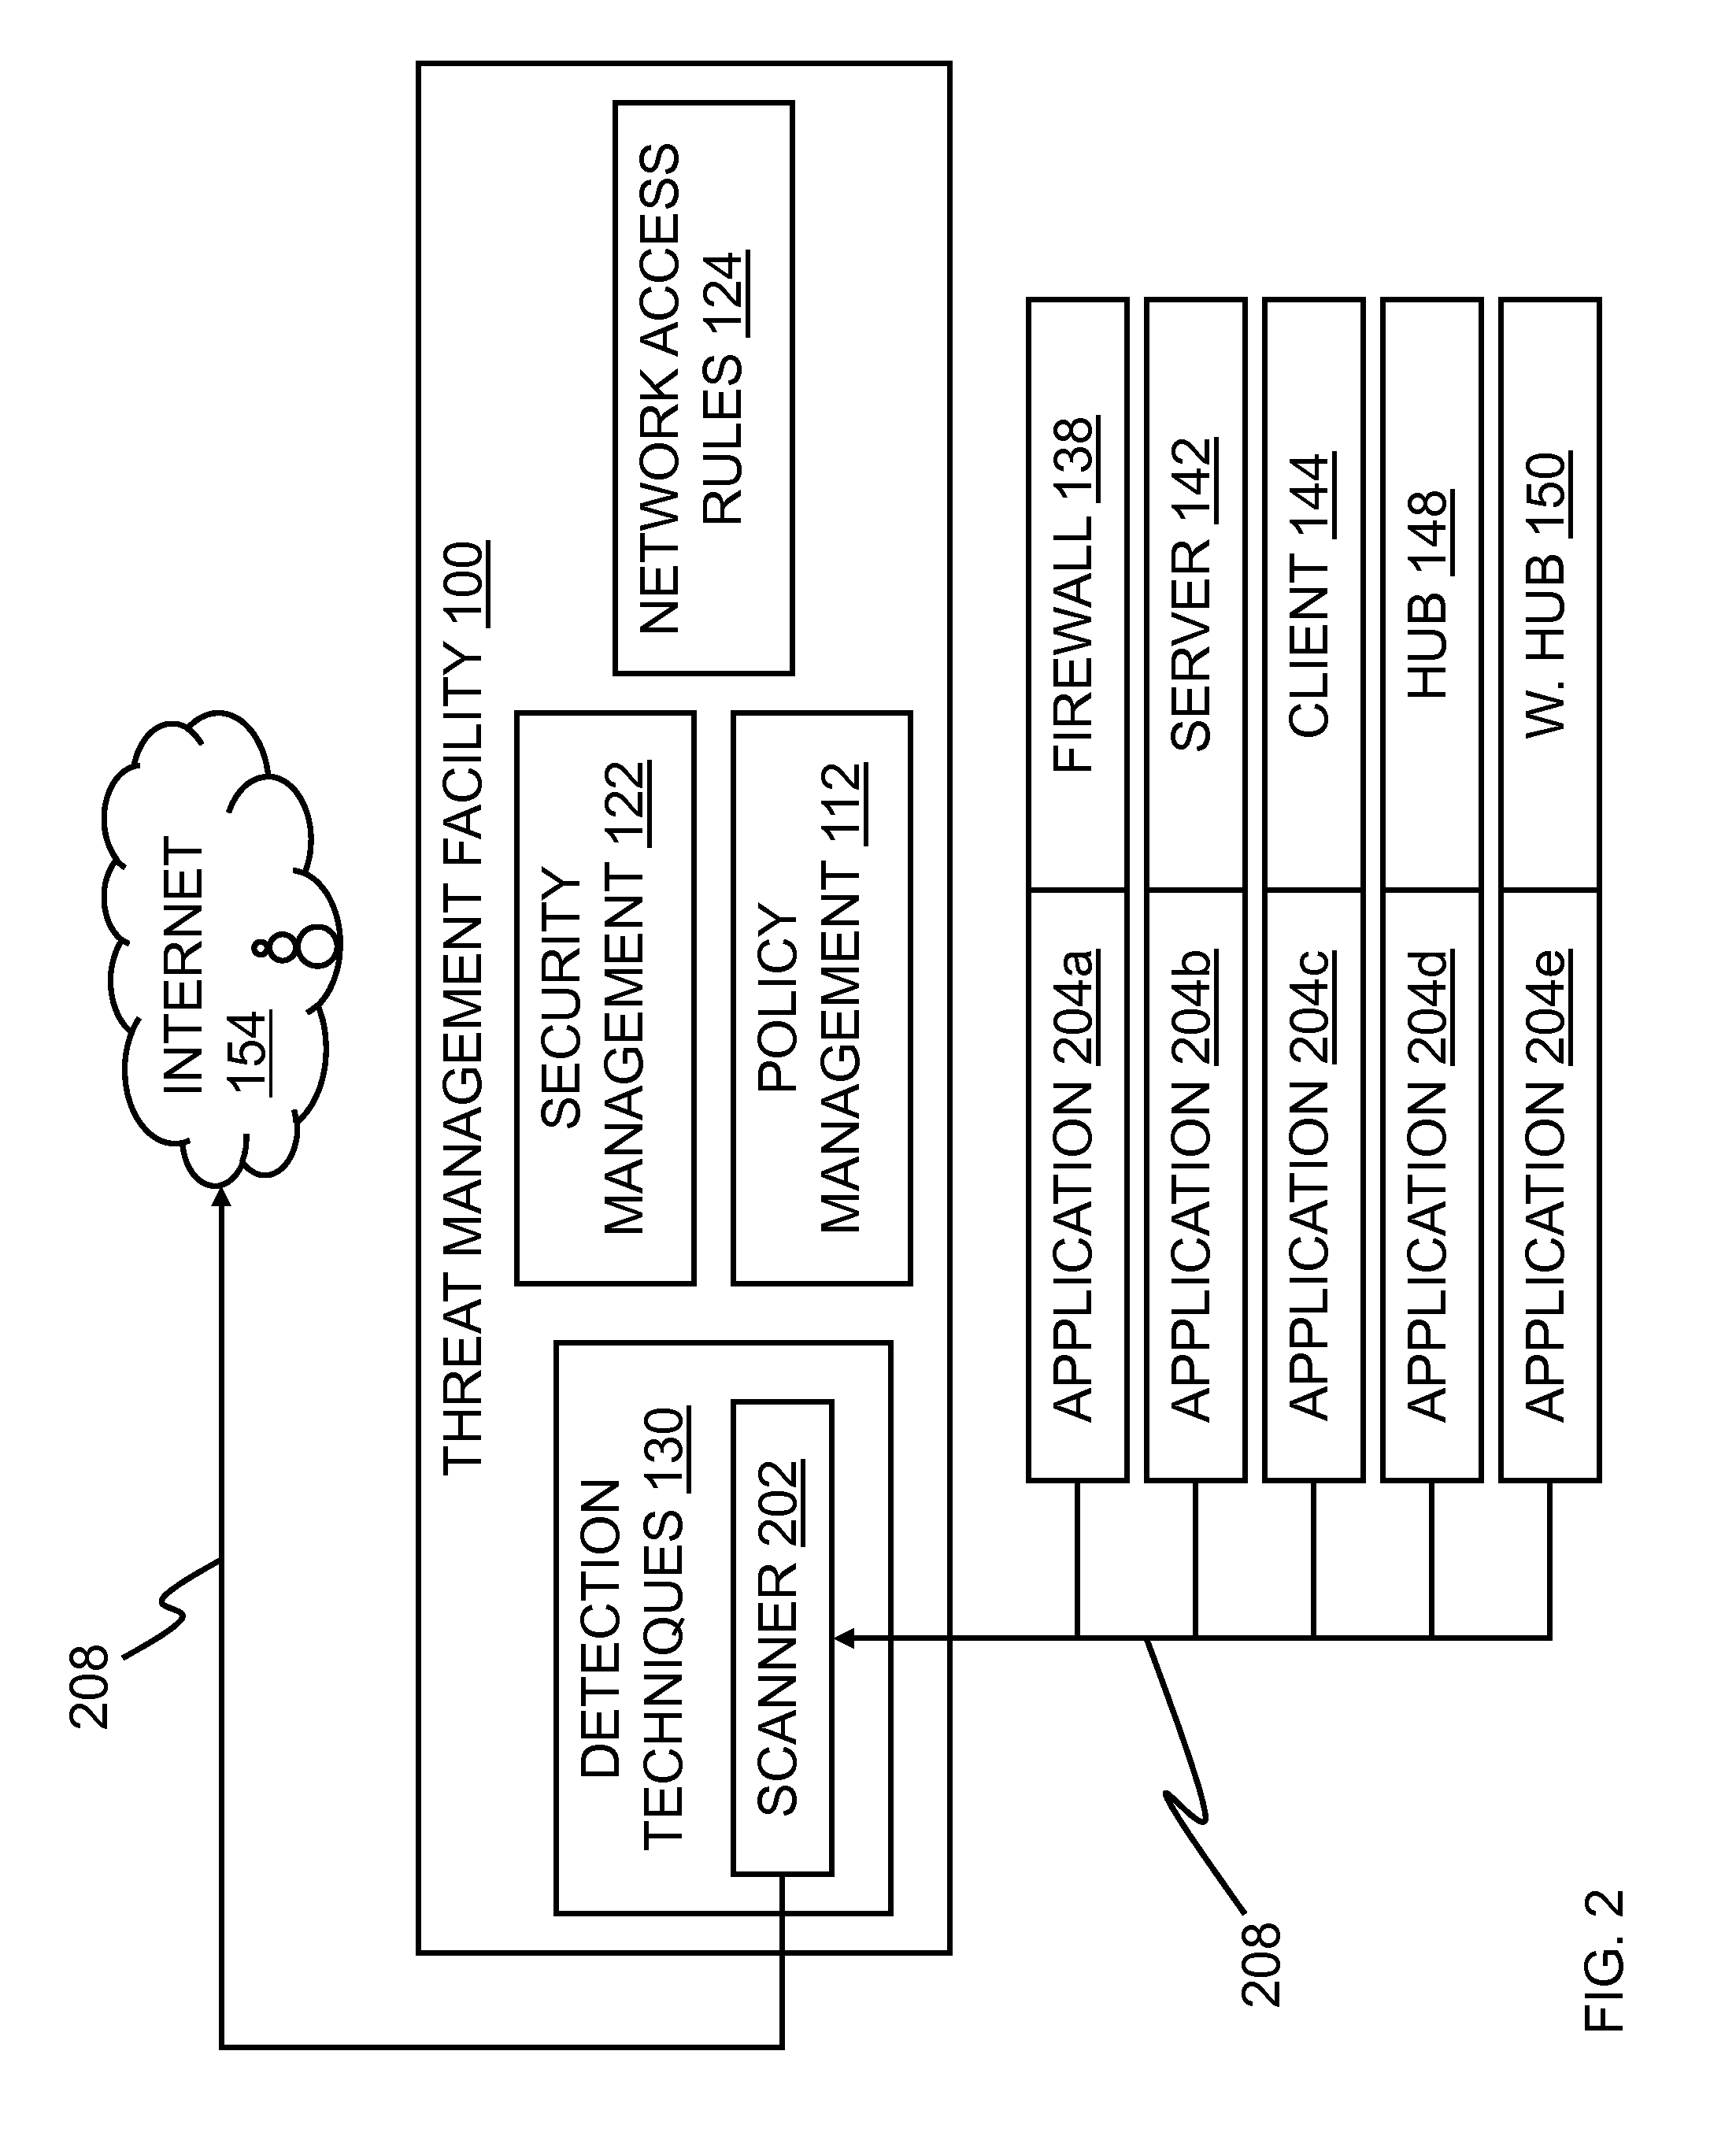 Systems and methods that detect sensitive data leakages from applications